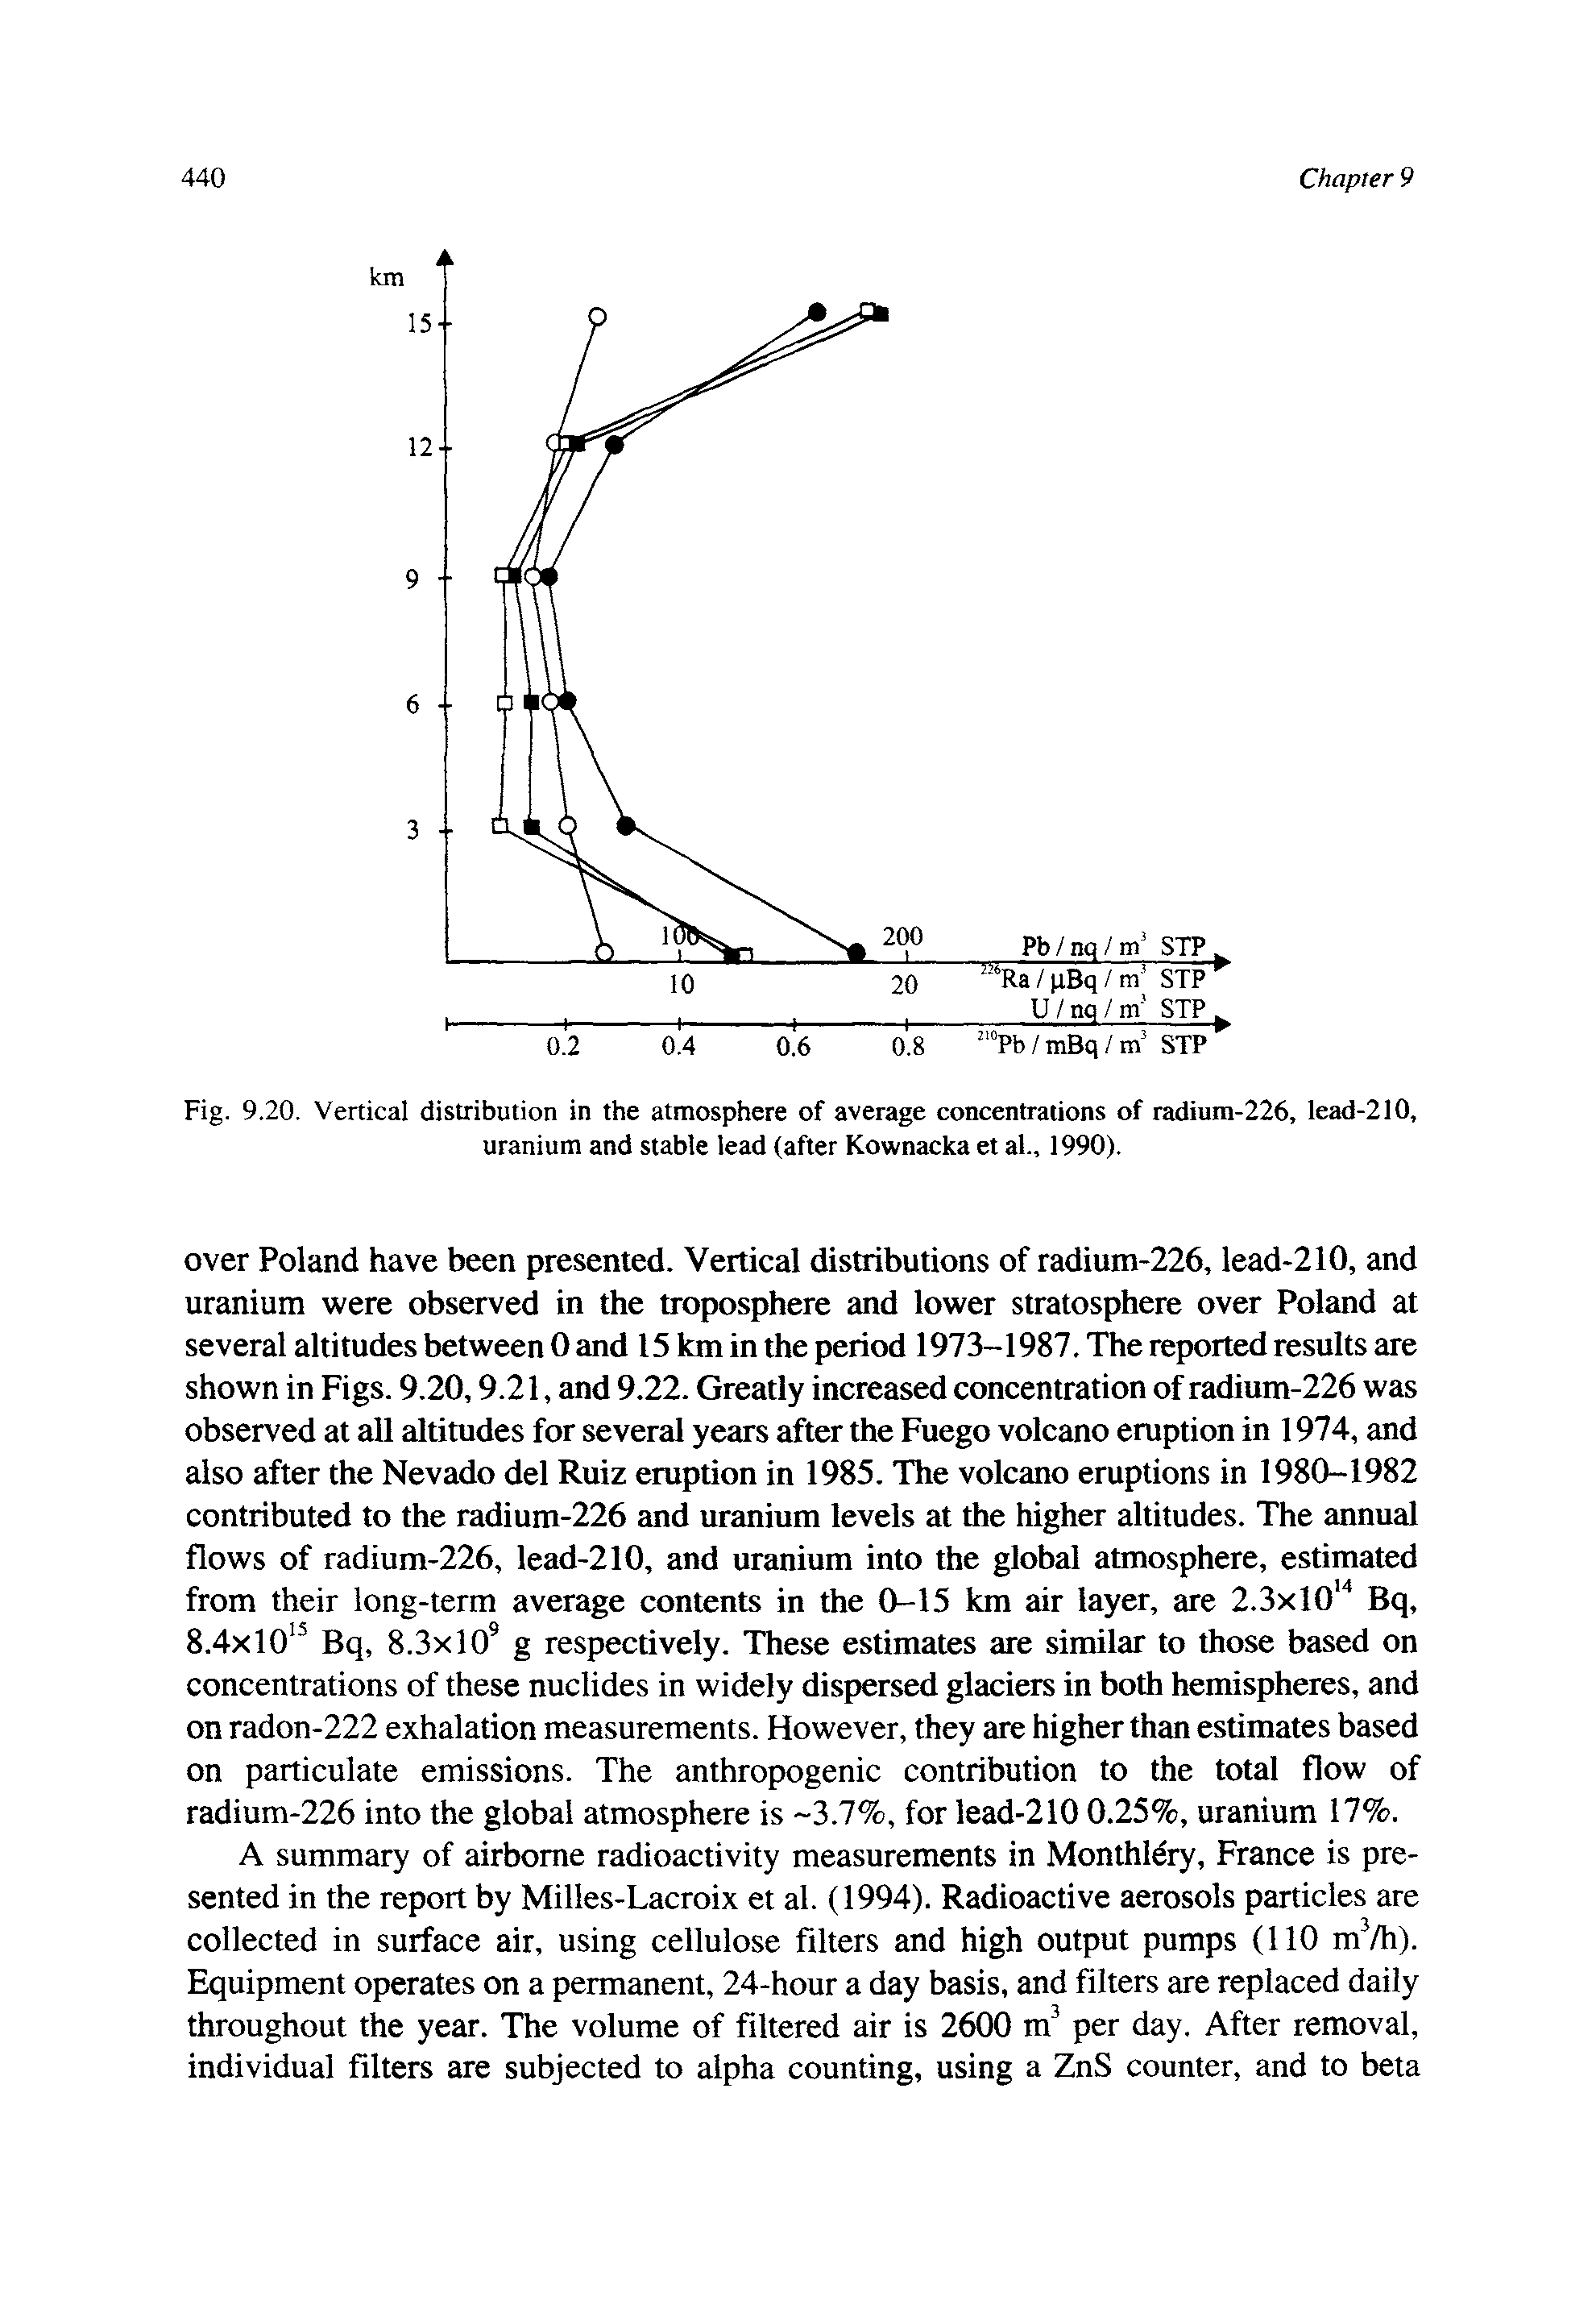 Fig. 9,20. Vertical distribution in the atmosphere of average concentrations of radium-226, lead-210, uranium and stable lead (after Kownacka et al., 1990).